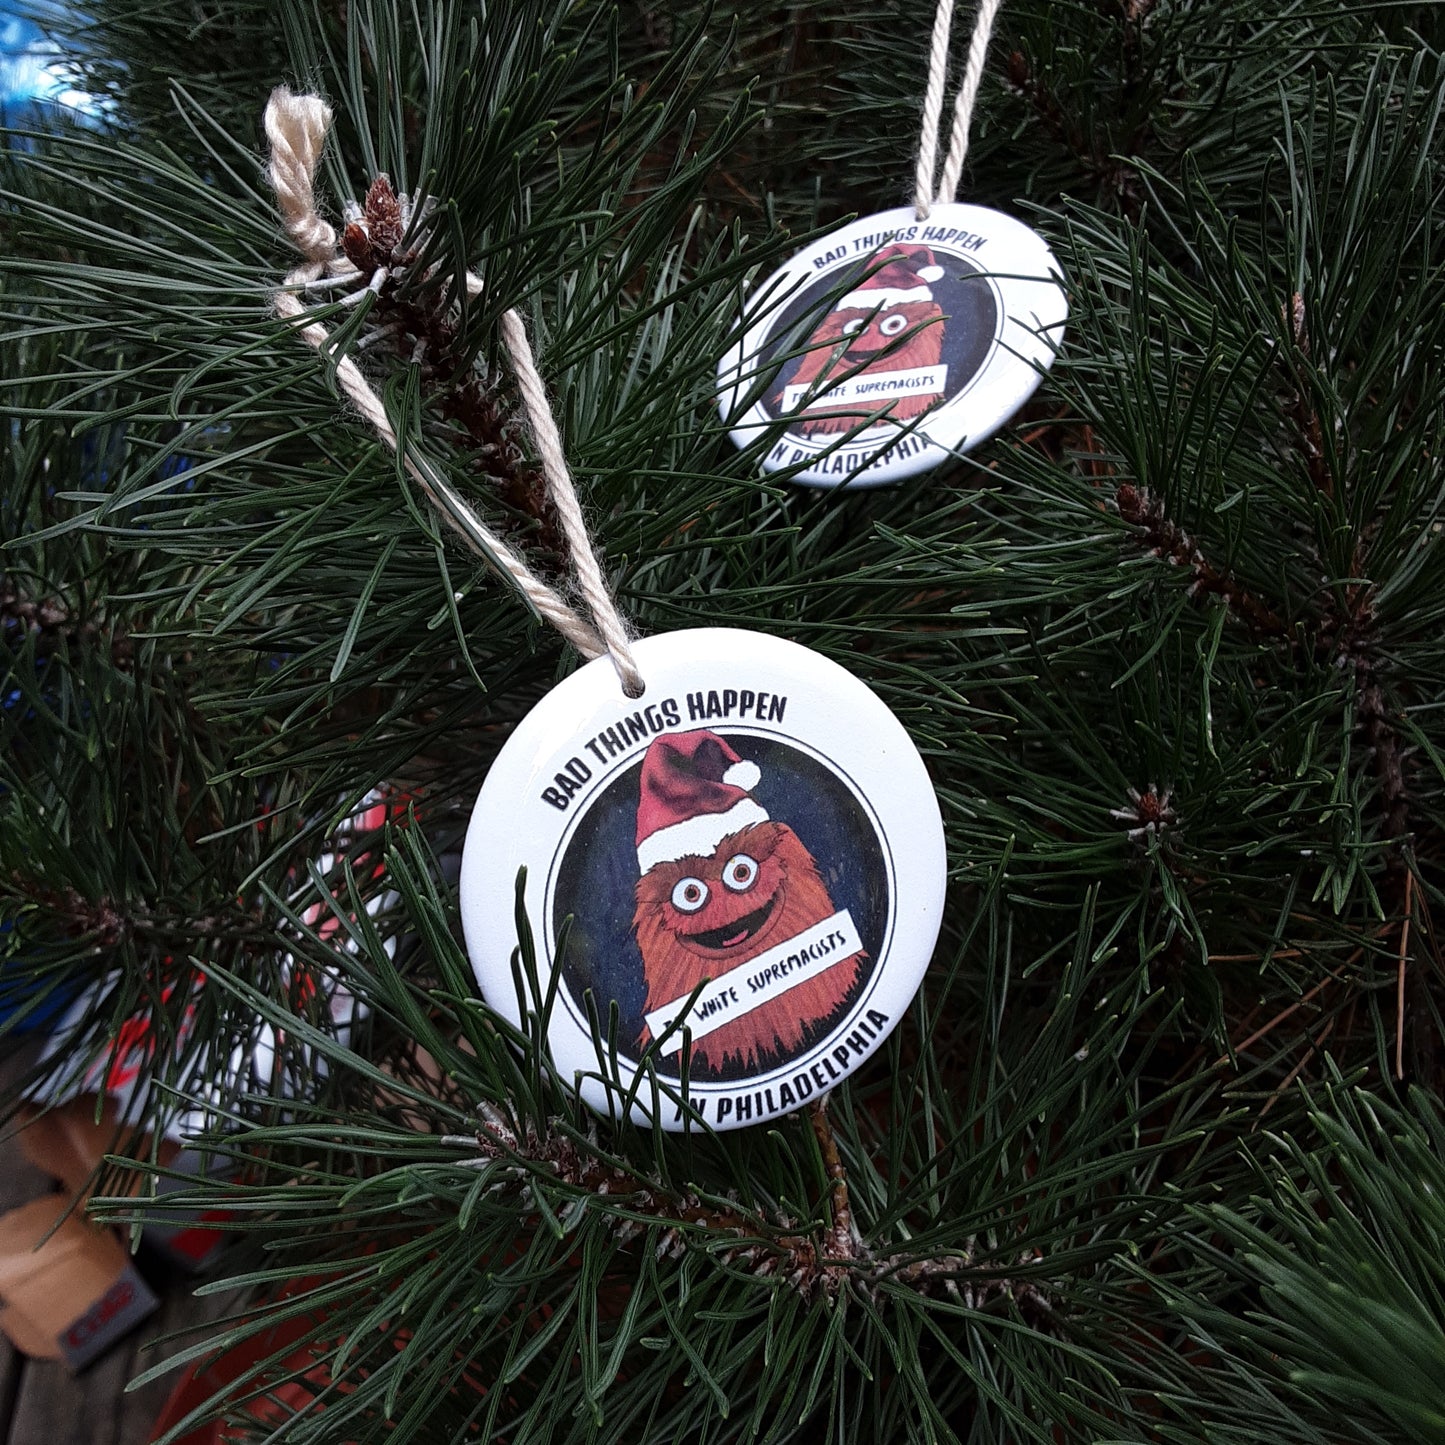 Bad Things Happen Grit Santa Charms / Ornaments by Miller Potoma